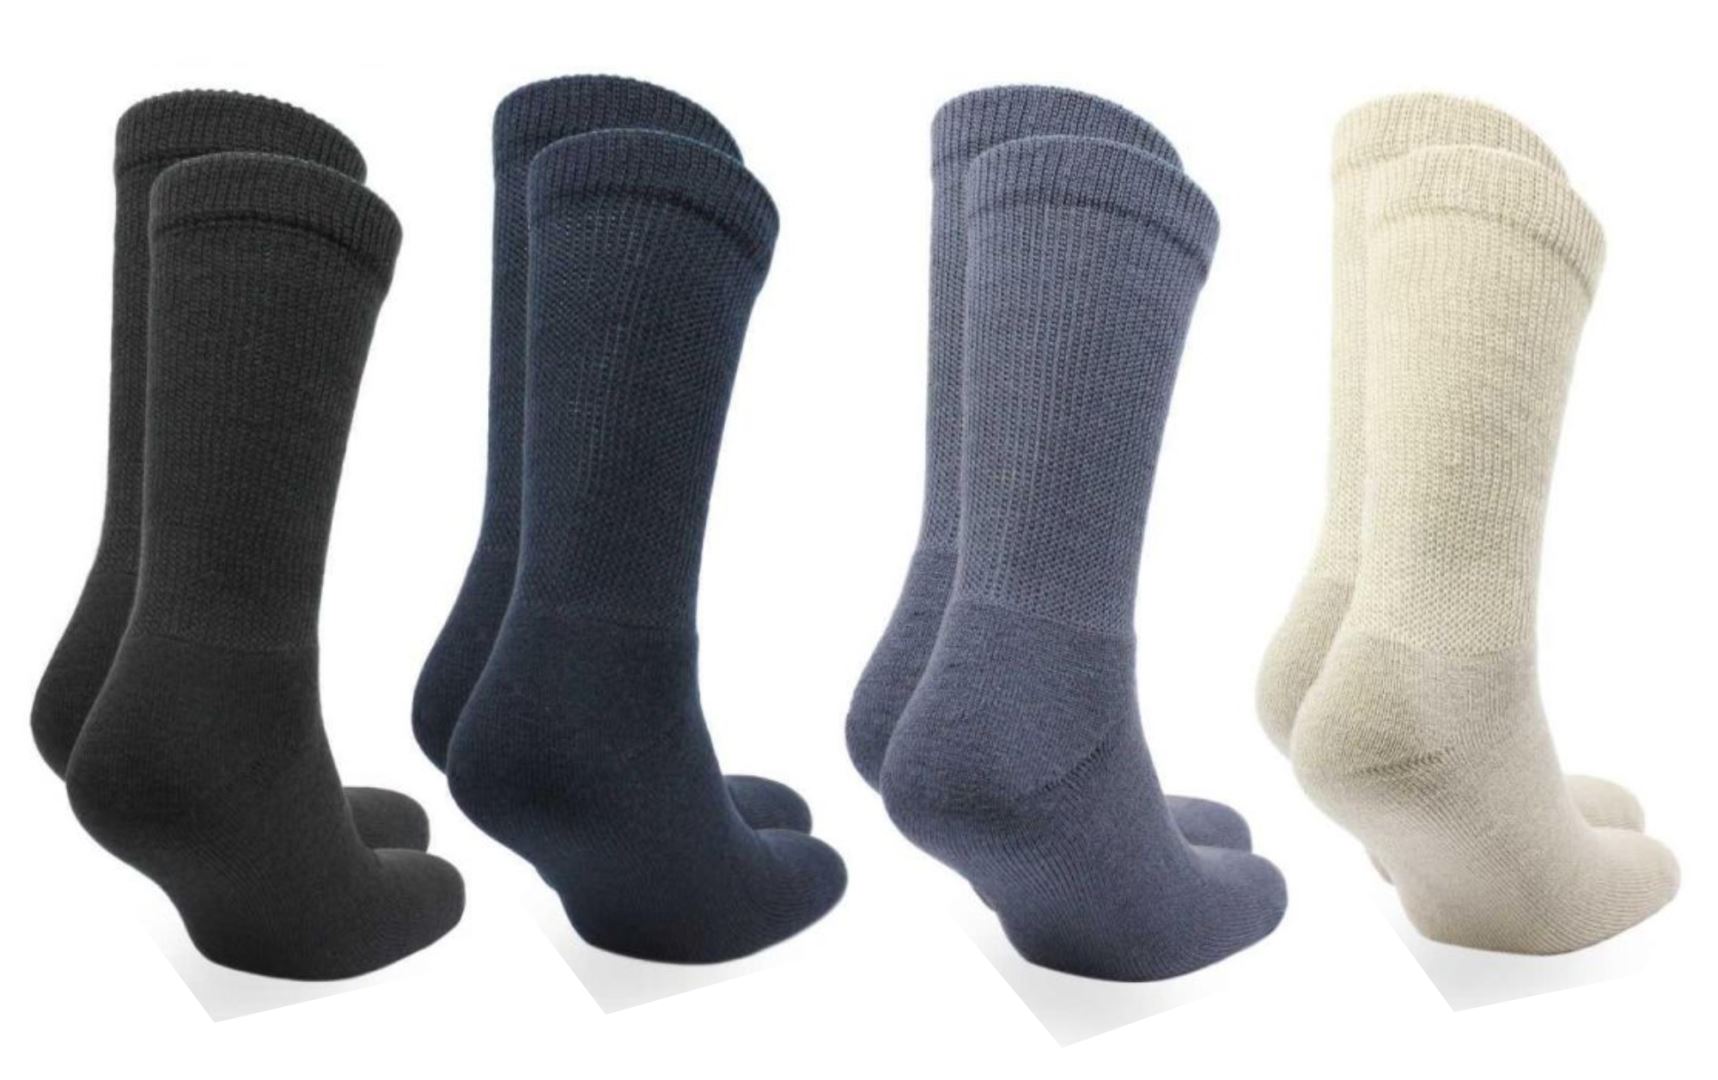 Diabetic and Oedema Extra Wide Socks